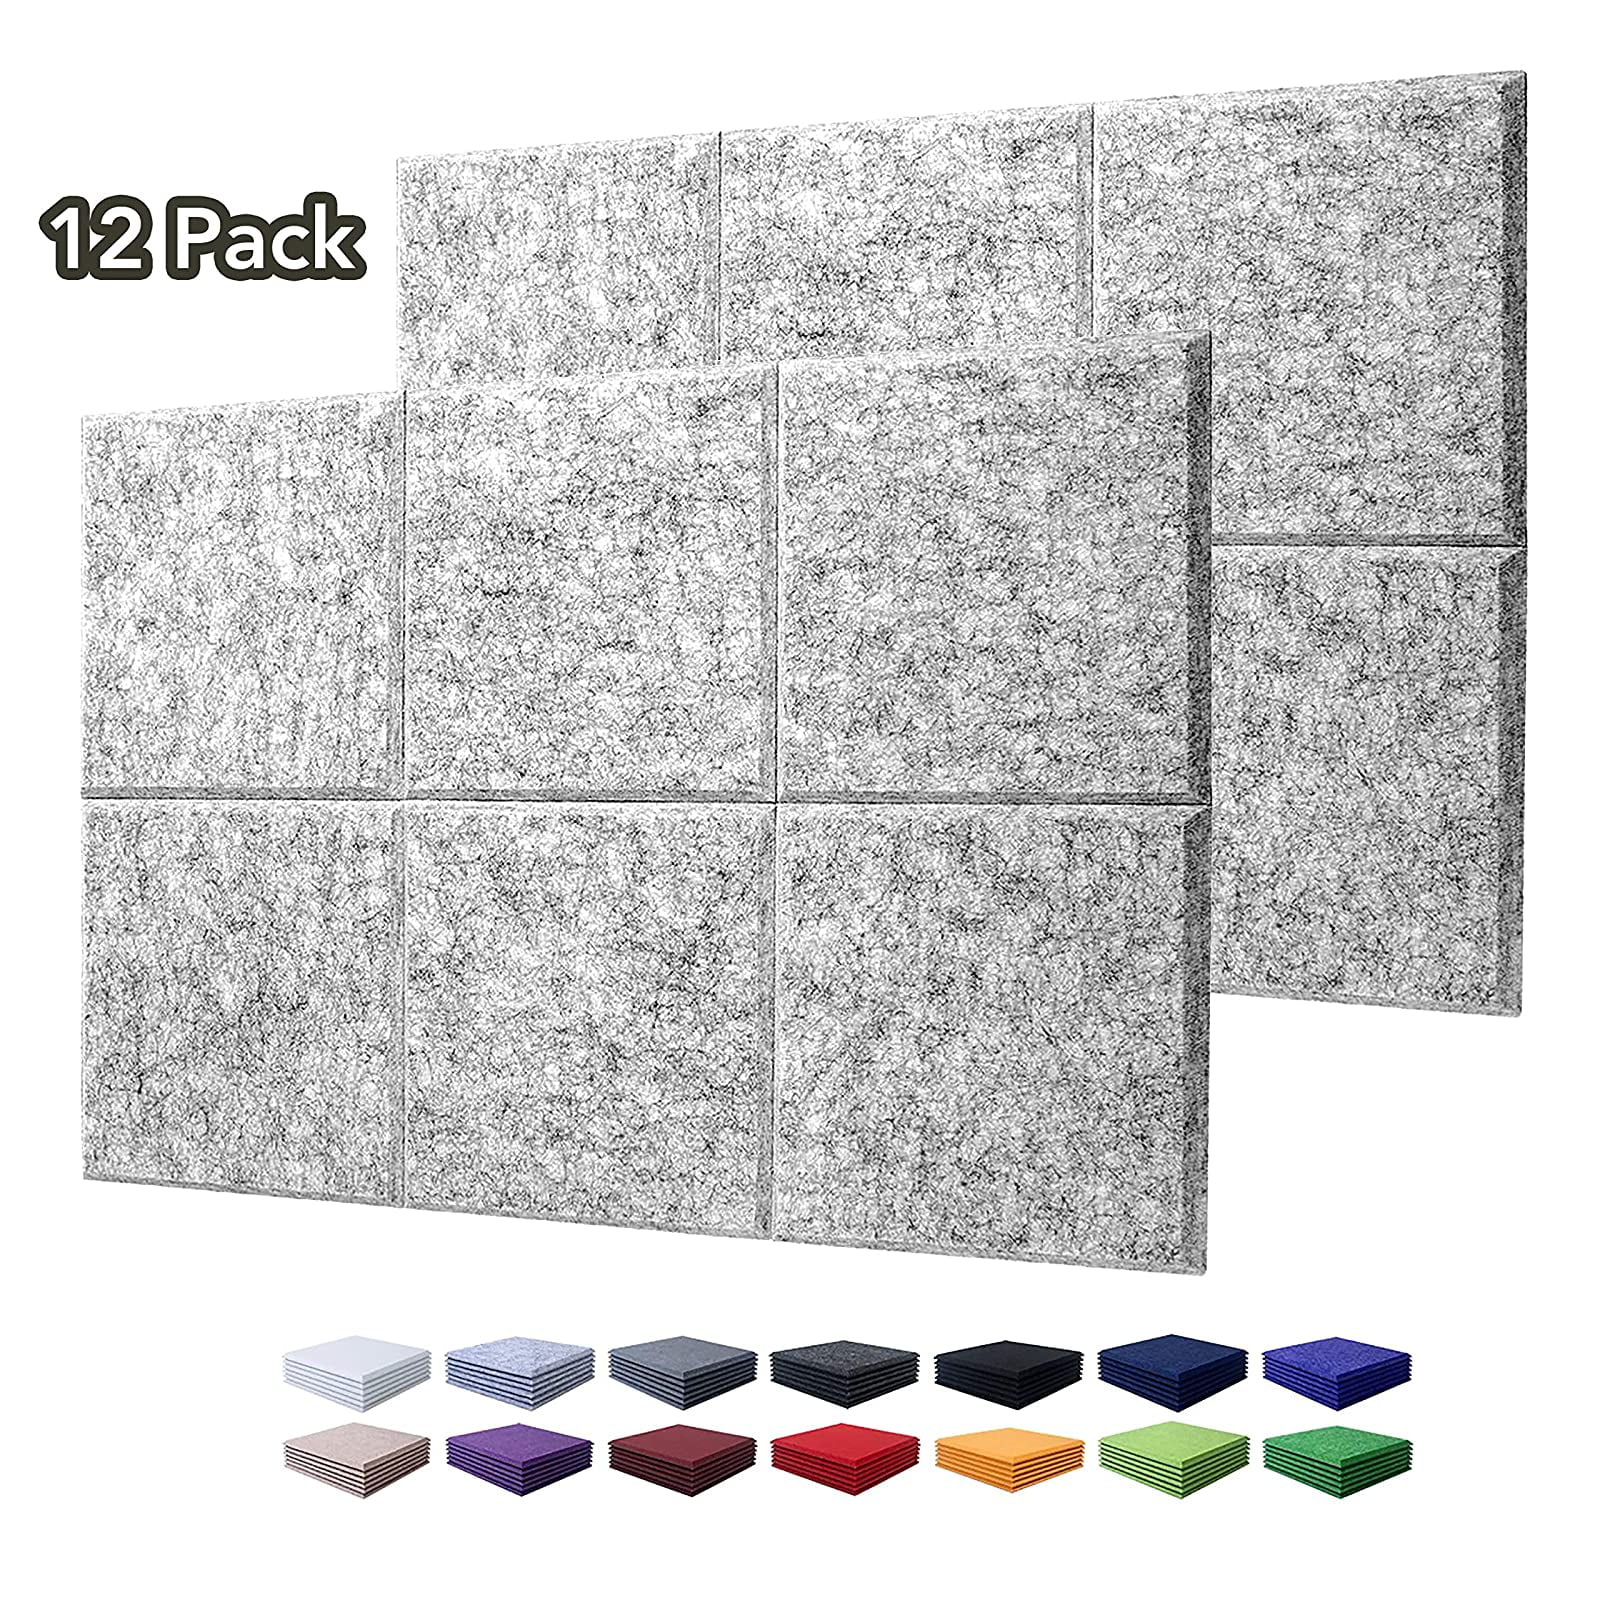 Acoustic Treatment Used in Home & Offices 12 X 12 X 0.4 Inches Grey Acoustic Soundproofing Insulation Panel Tiles 12 Pack Set Acoustic Absorption Panel 